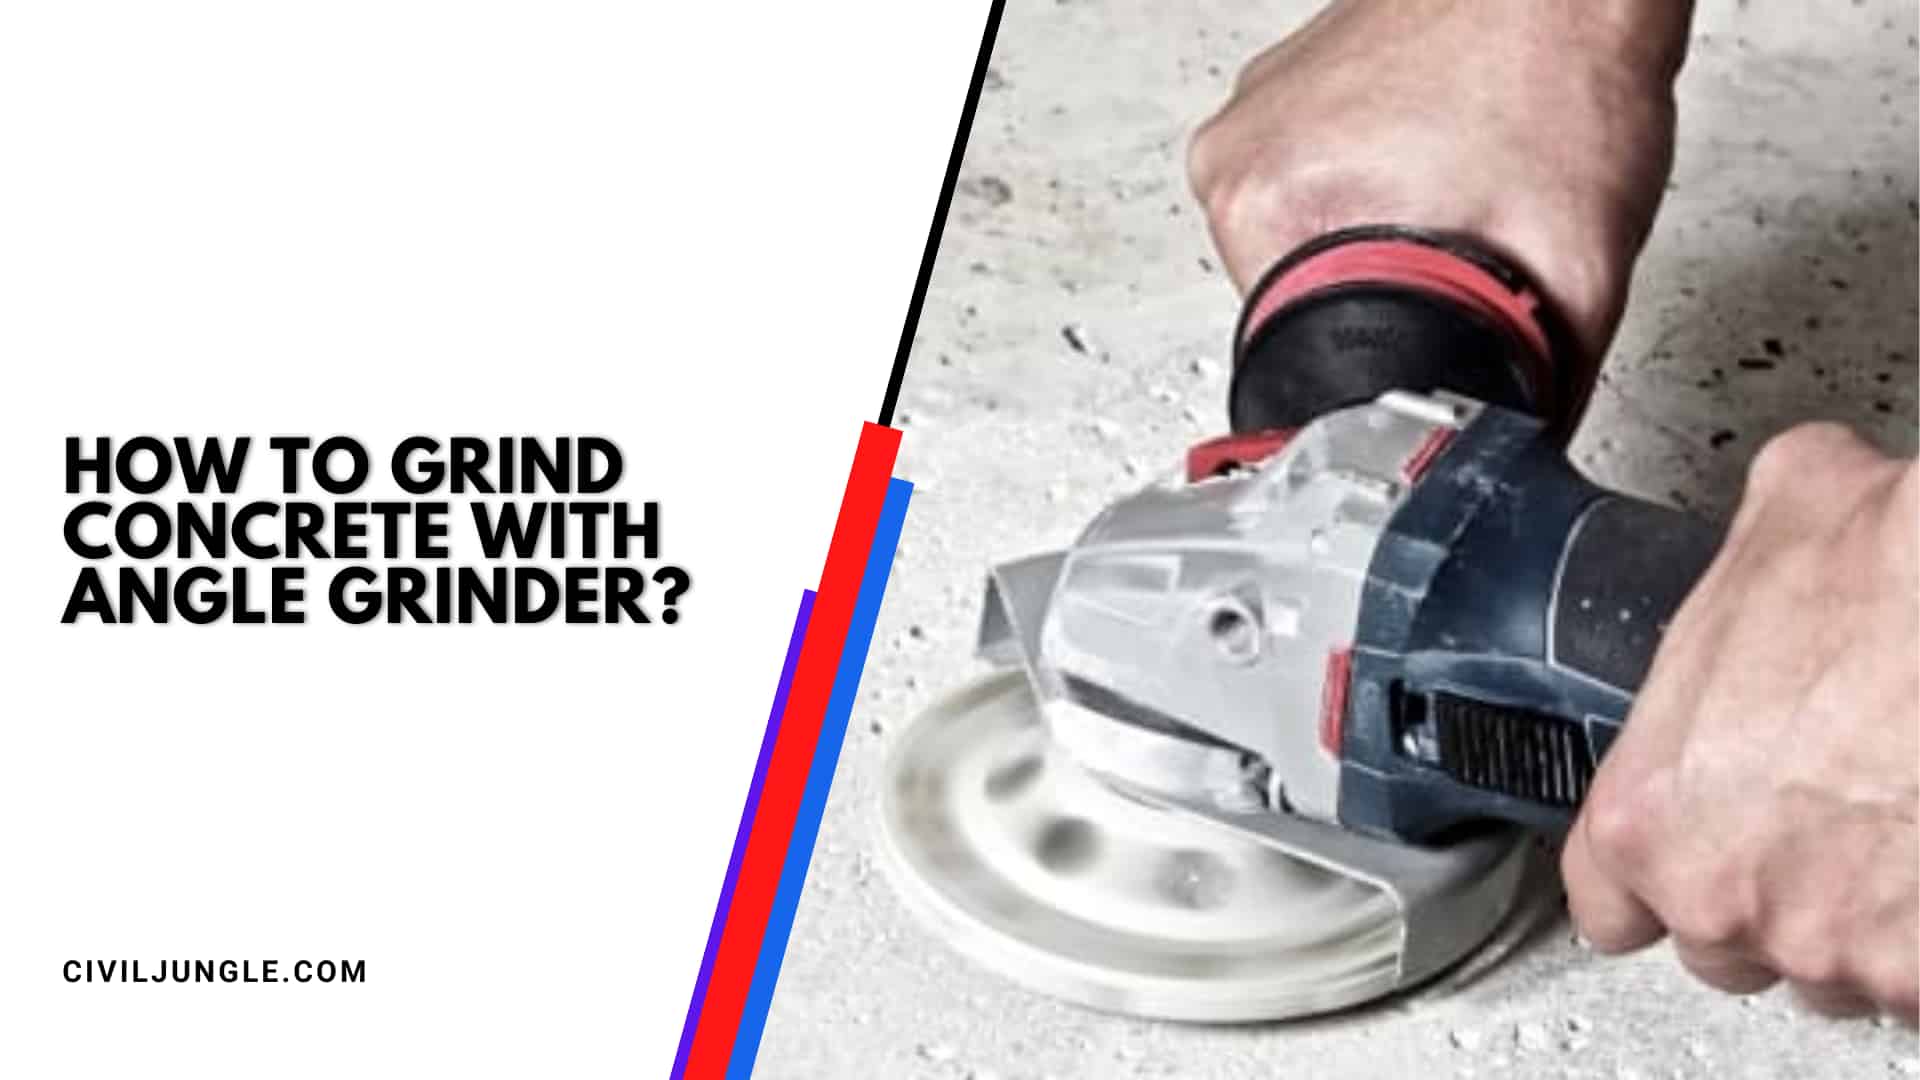 How to Grind Concrete with Angle Grinder?